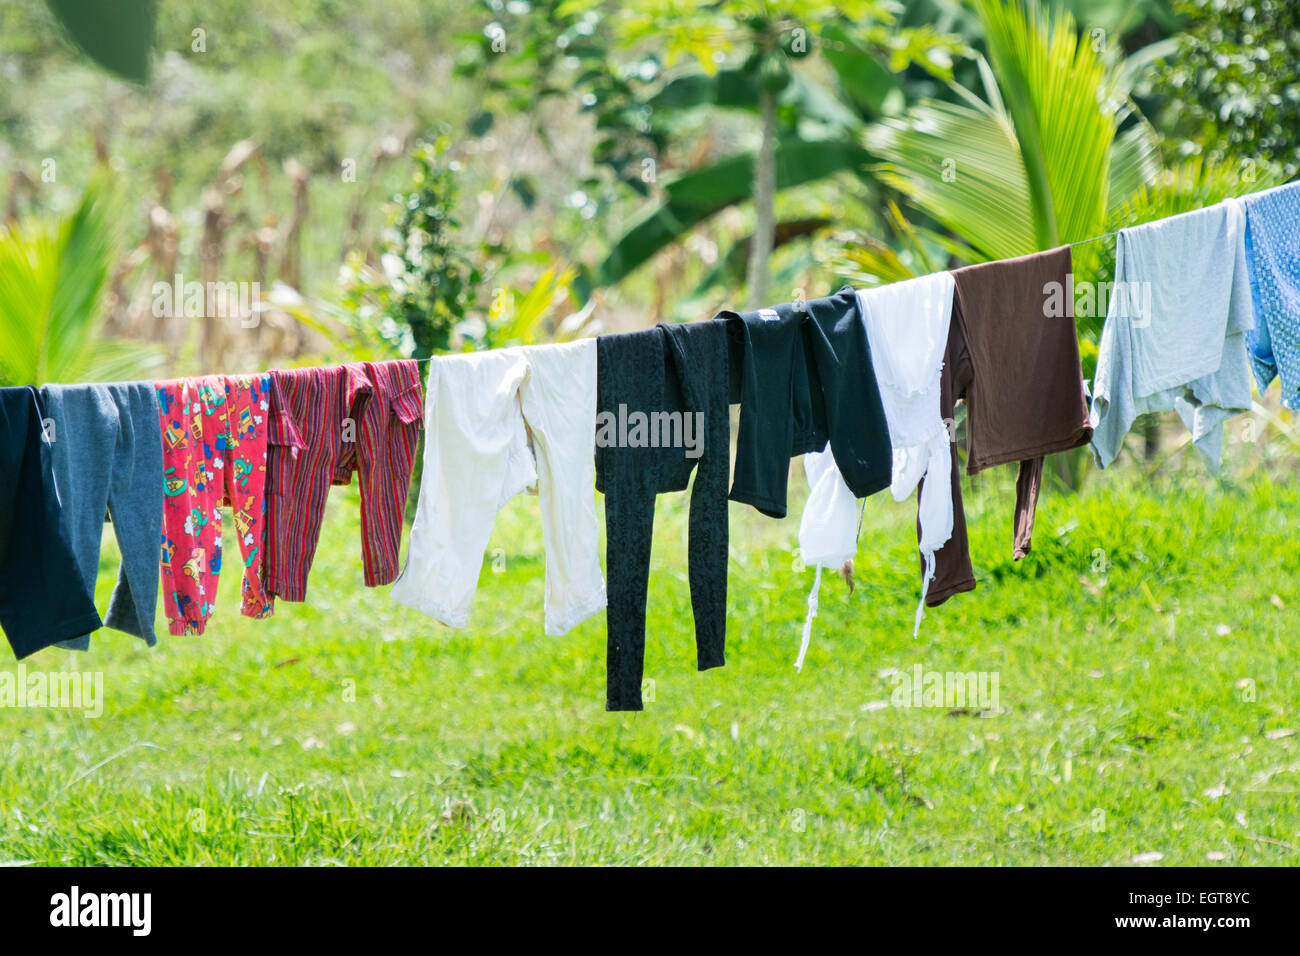 Clothes hanging on a washing line Stock Photo